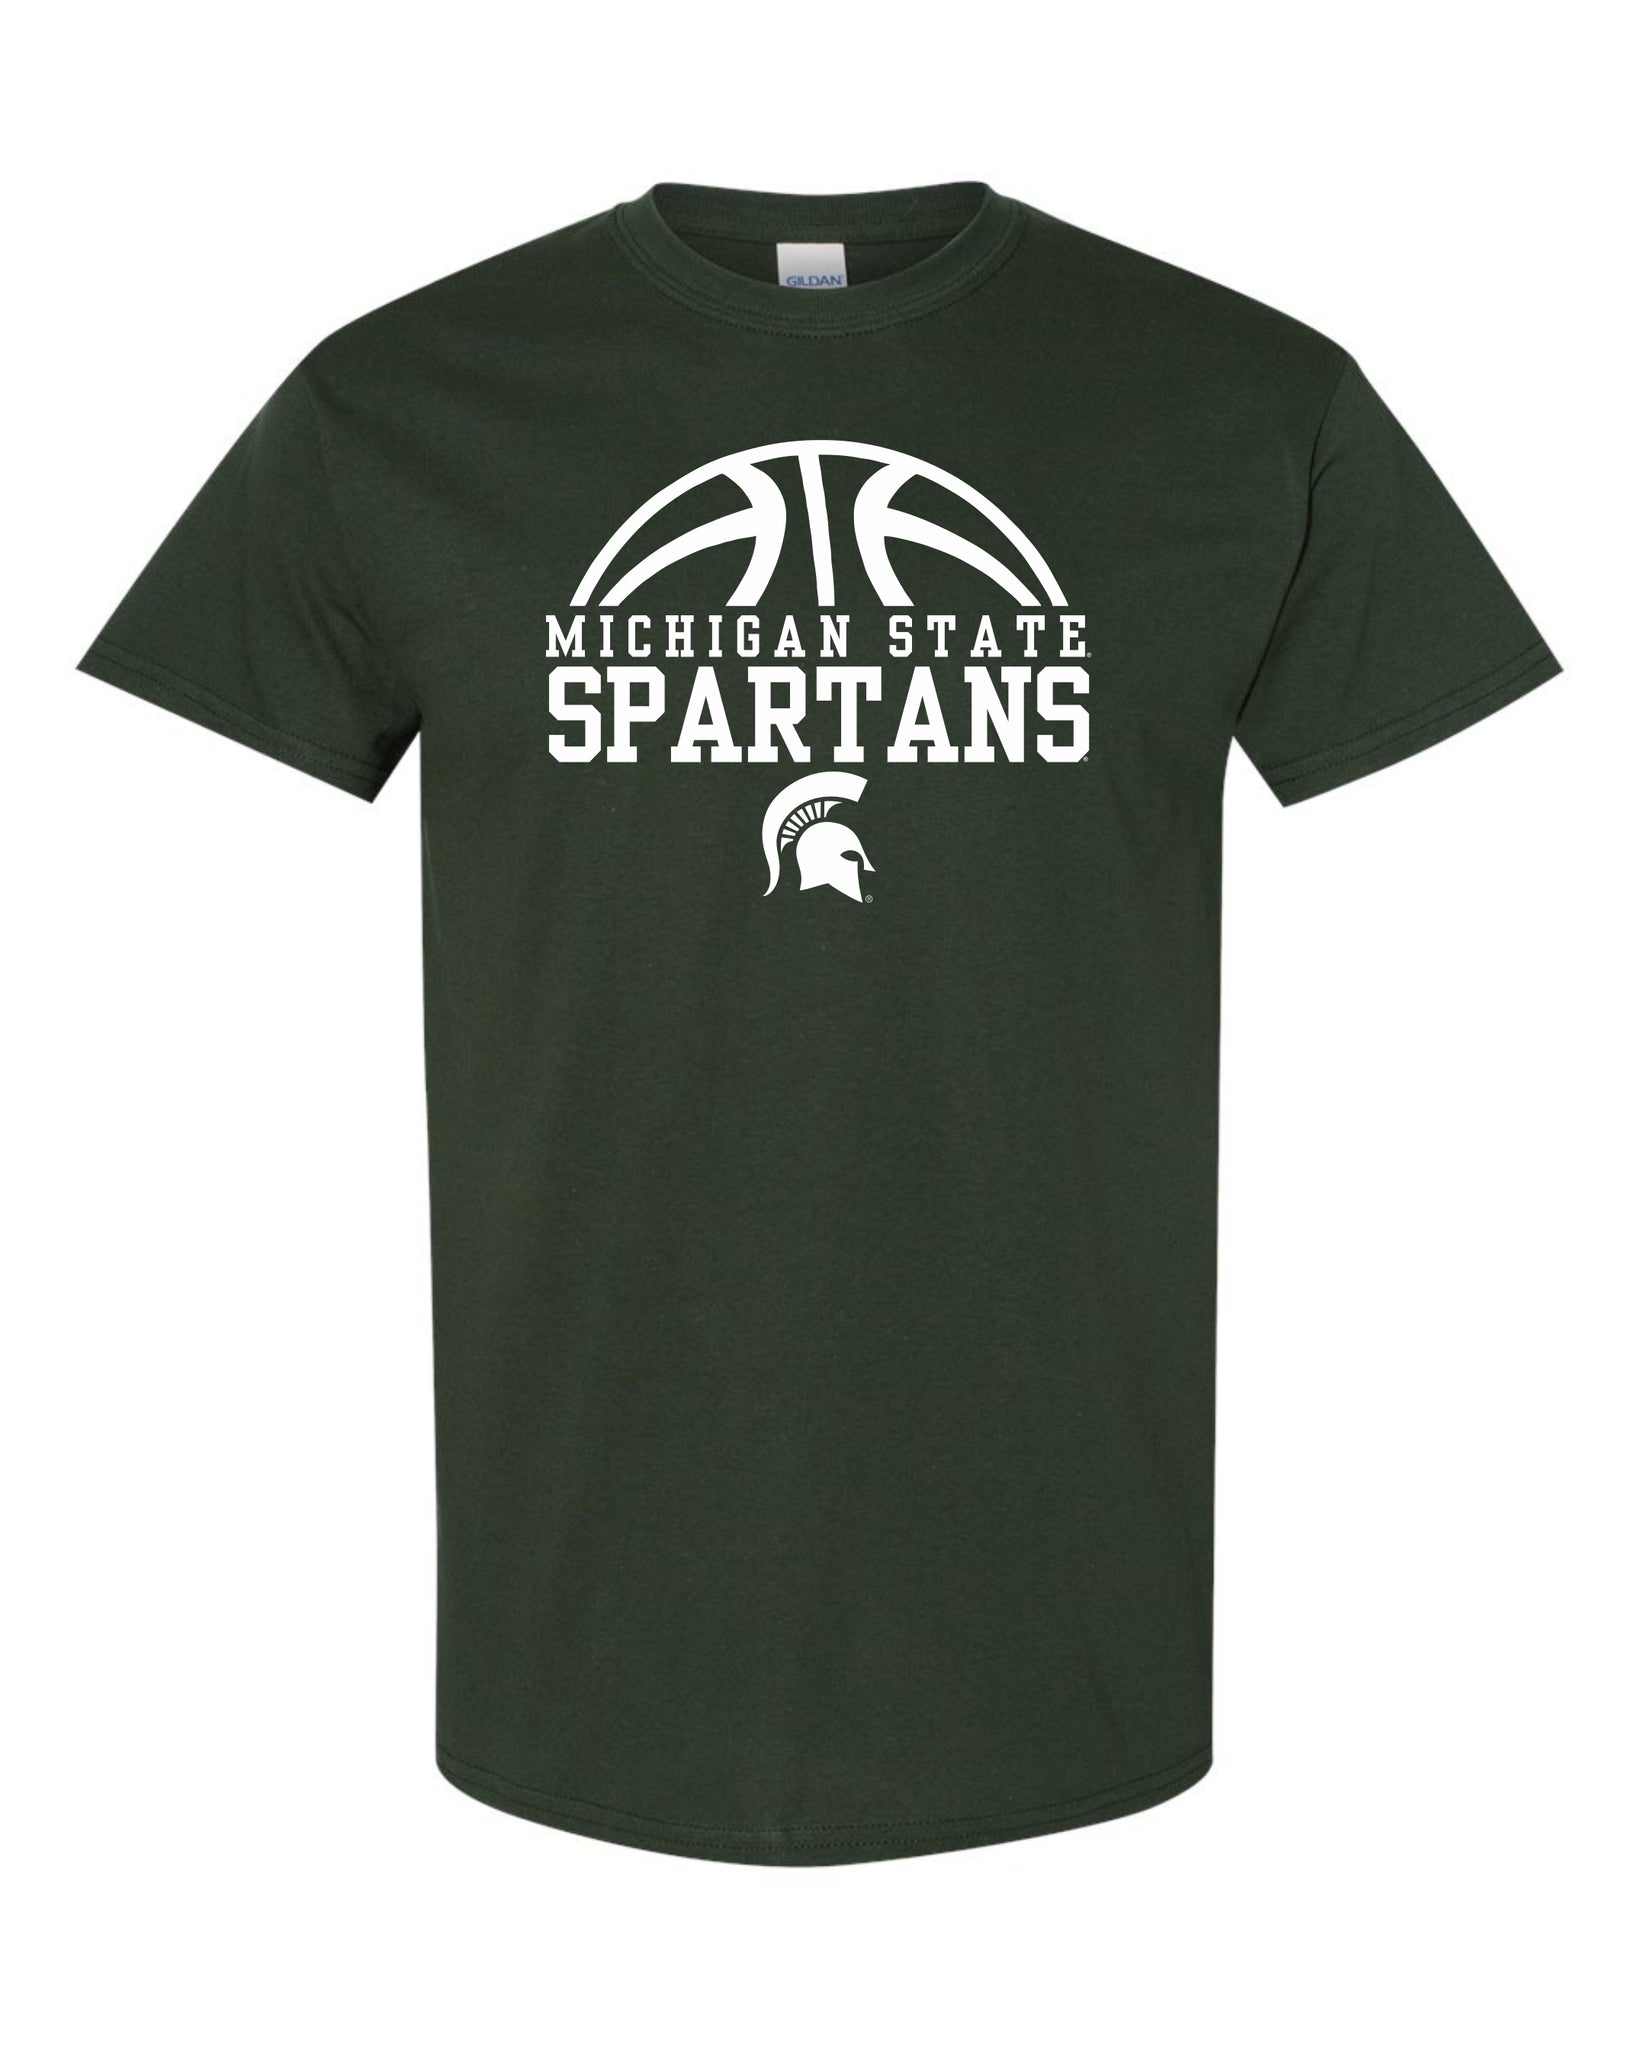 Michigan State Spartans Basketball Jerseys - Spartans Store